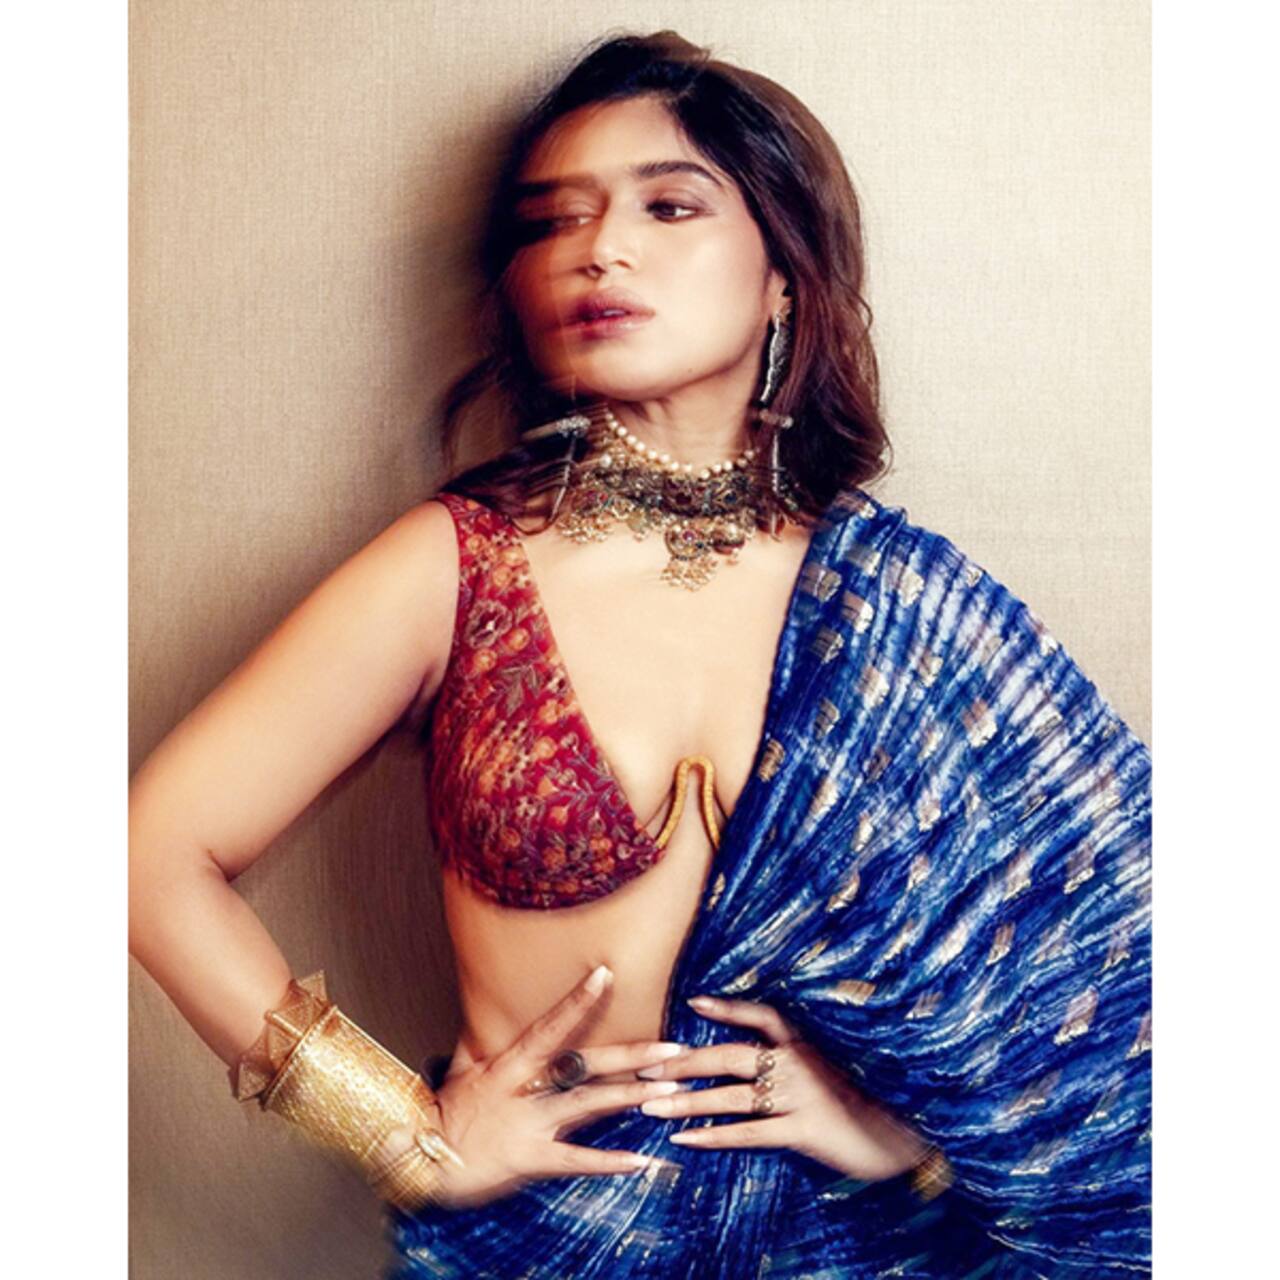 Bhumi Pednekar's risqué blouse becomes the hottest topic